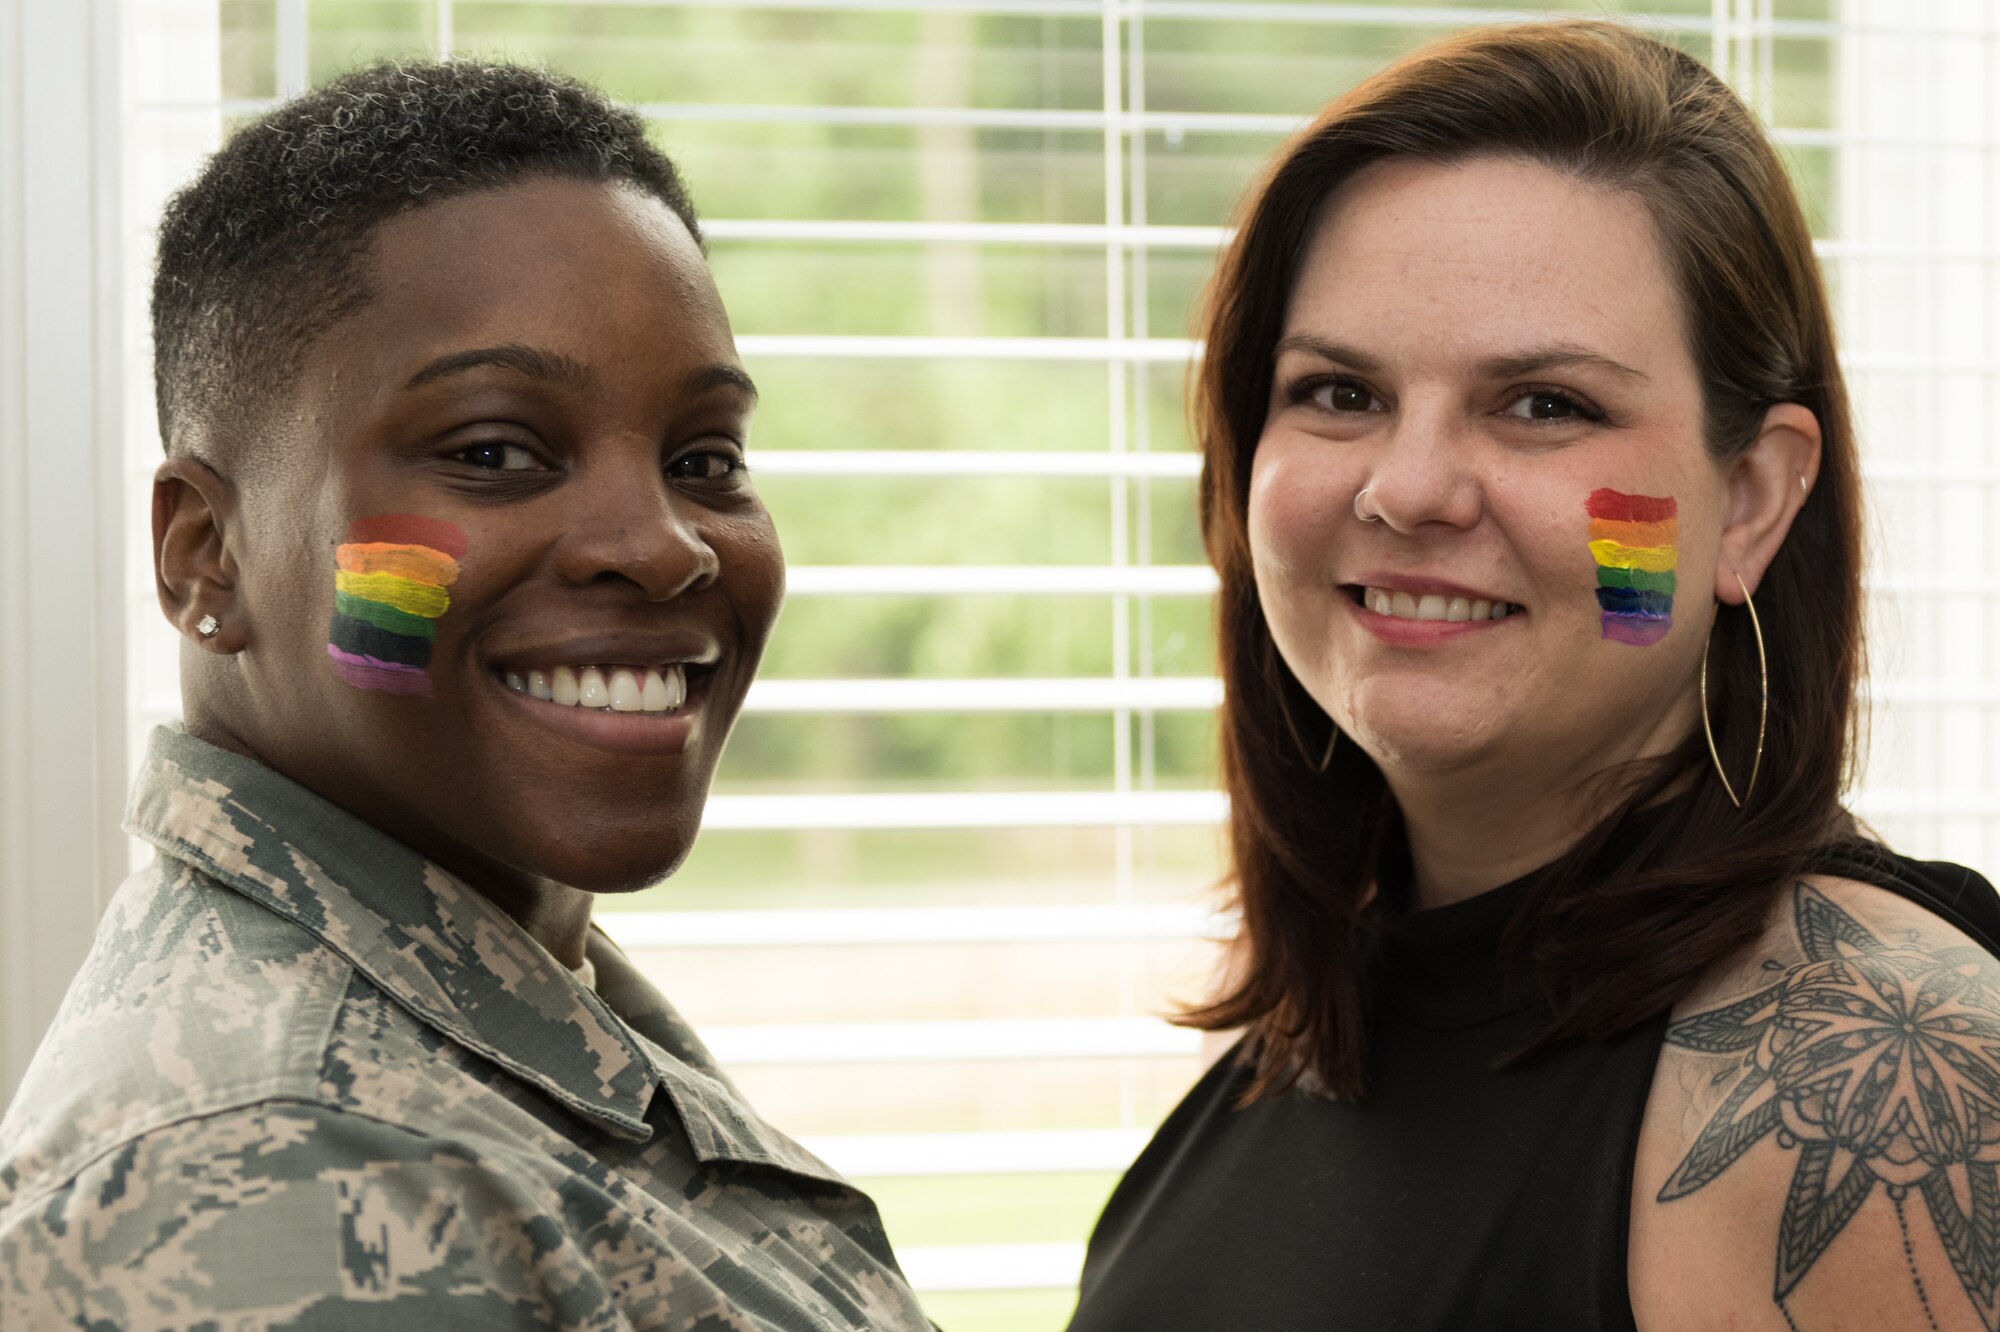 U.S Air Force Master Sgt. Staci Cooper, 131st Operation Support Flight Aviation Resource Management superintendent, and Danie Cooper, Lincoln College Preparatory Academy teacher, stand for a photo on June 10, 2020 at Blue Springs, Missouri. Cooper and her wife married in February 2019 a year after their first date. (U.S Air Force photo by Airman 1st Class Christina Carter)